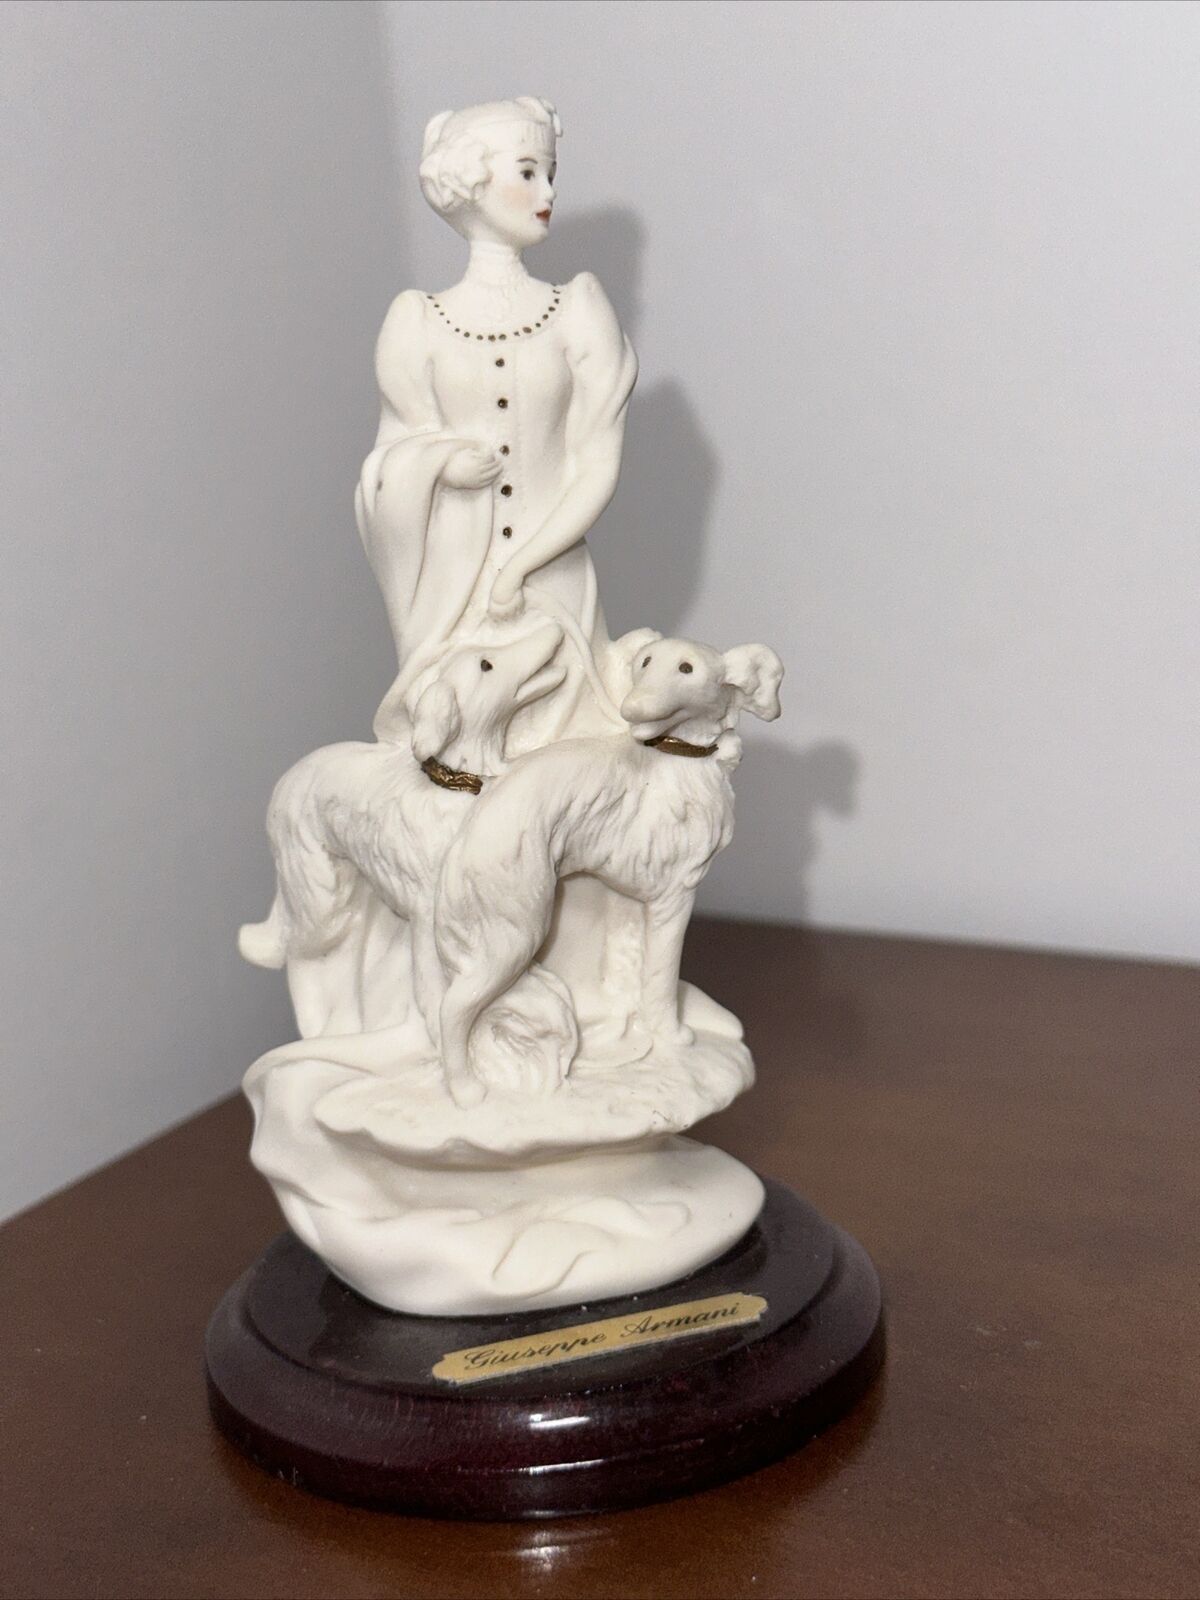 1993 Giuseppi Armani Figurine Woman with Dogs Wooden Base Signed Made in Italy